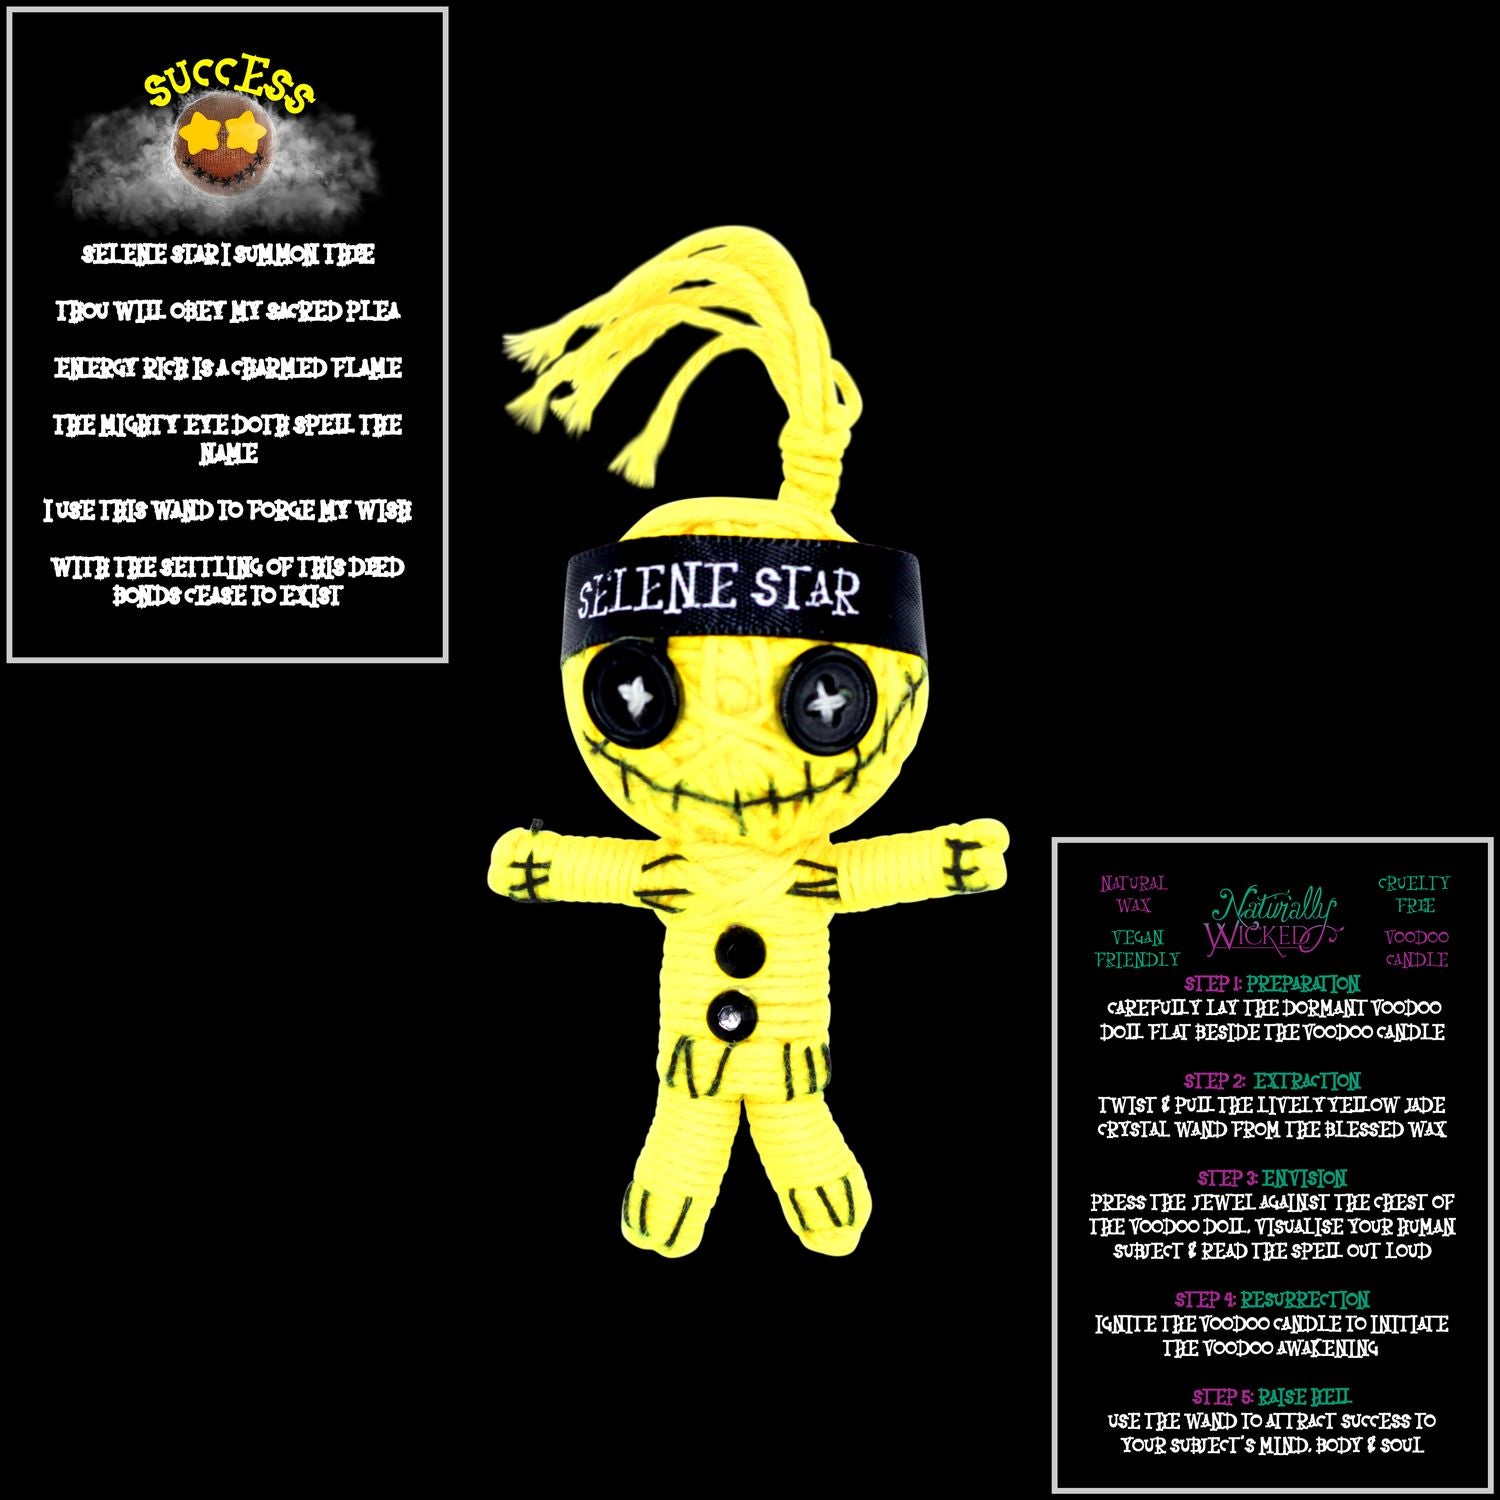  Naturally Wicked Yellow Voodoo Doll Selene Star Featured With Success Spell Cards. The Perfect Gift For Success.